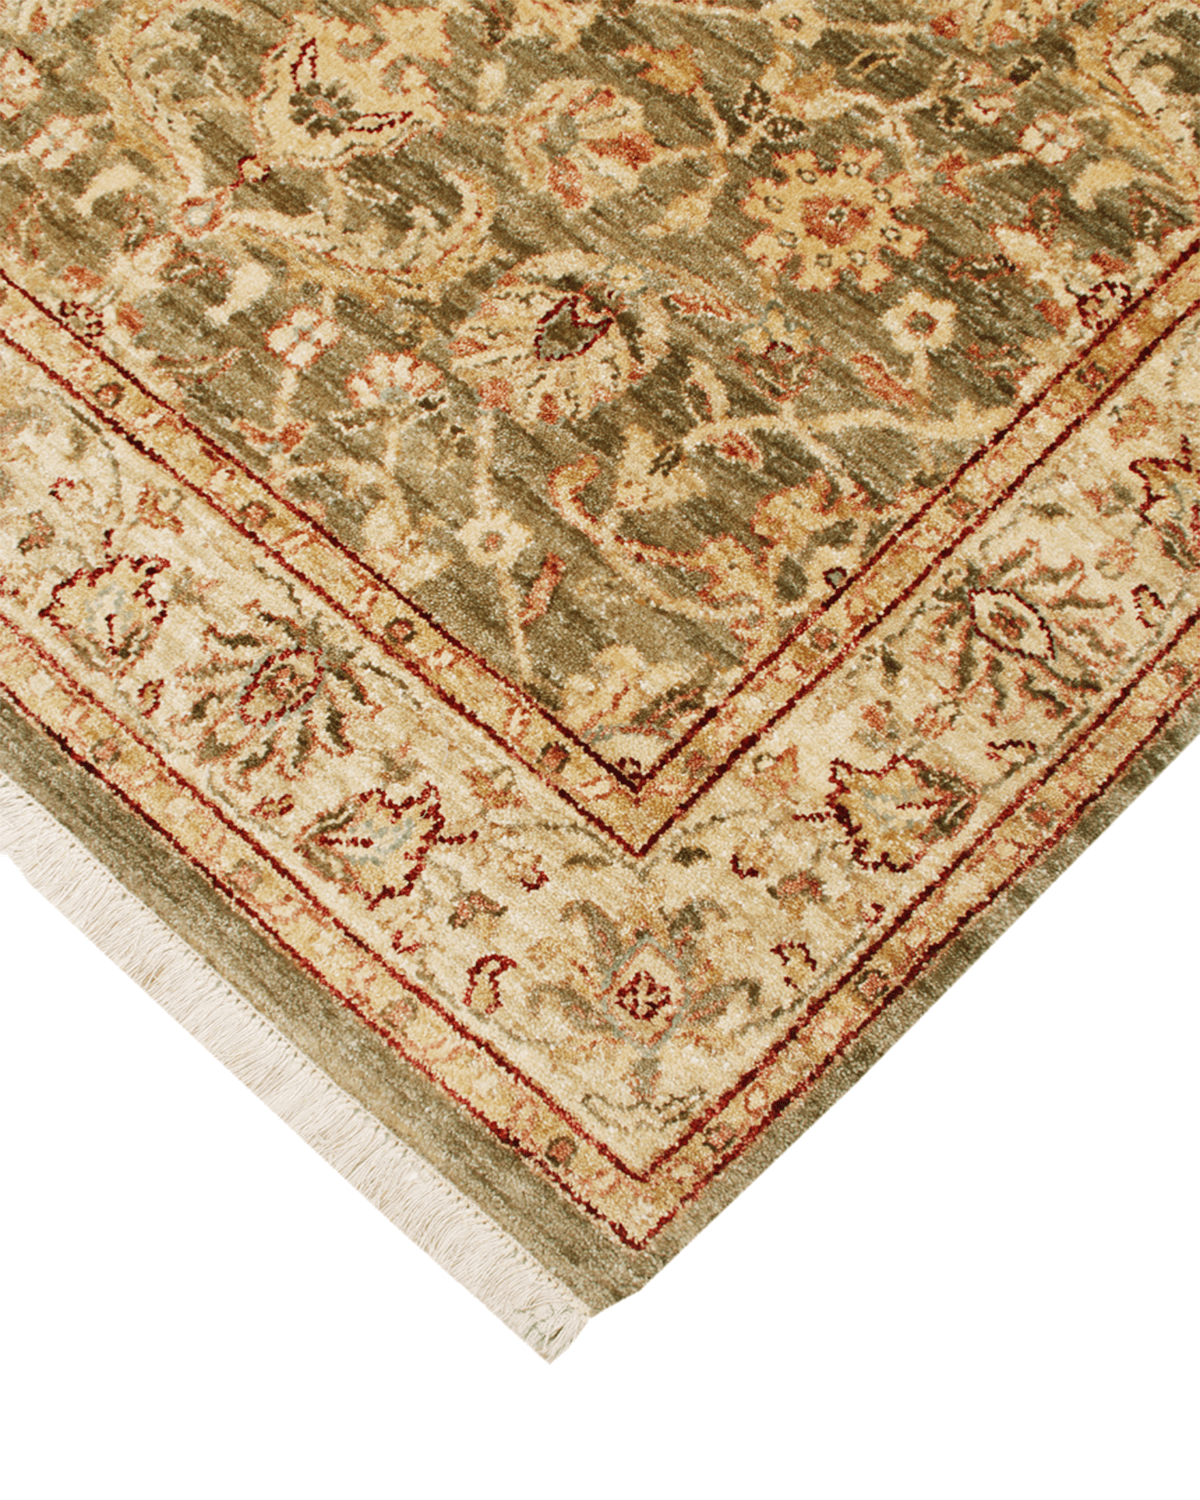 Hand-knotted Traditional Rug (Mahal-583)